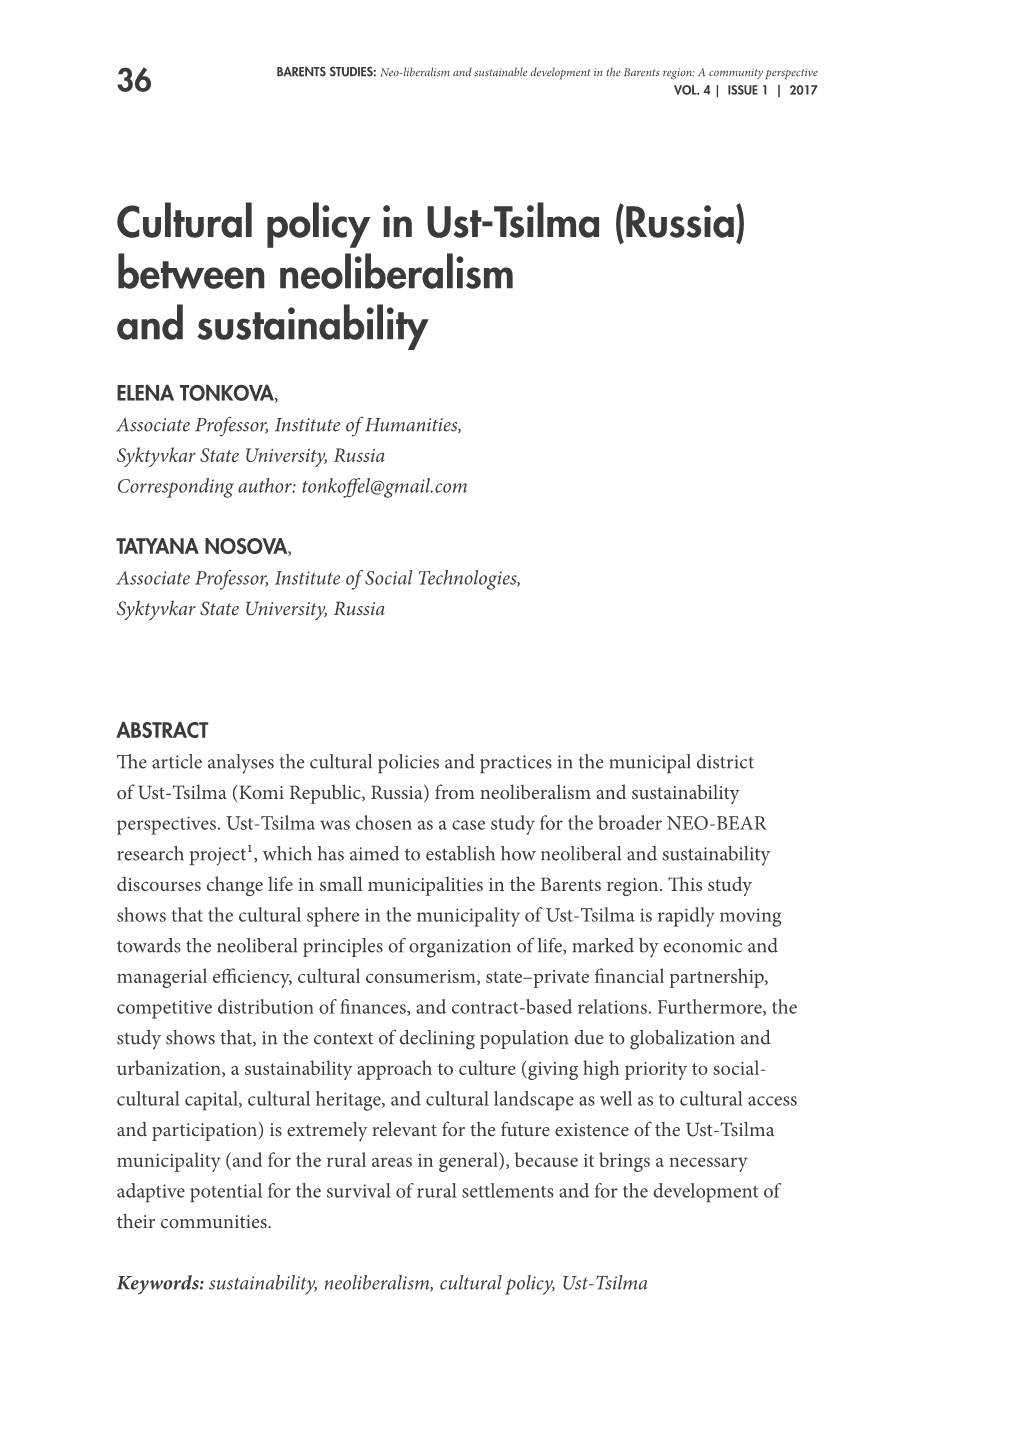 Cultural Policy in Ust-Tsilma (Russia) Between Neoliberalism and Sustainability